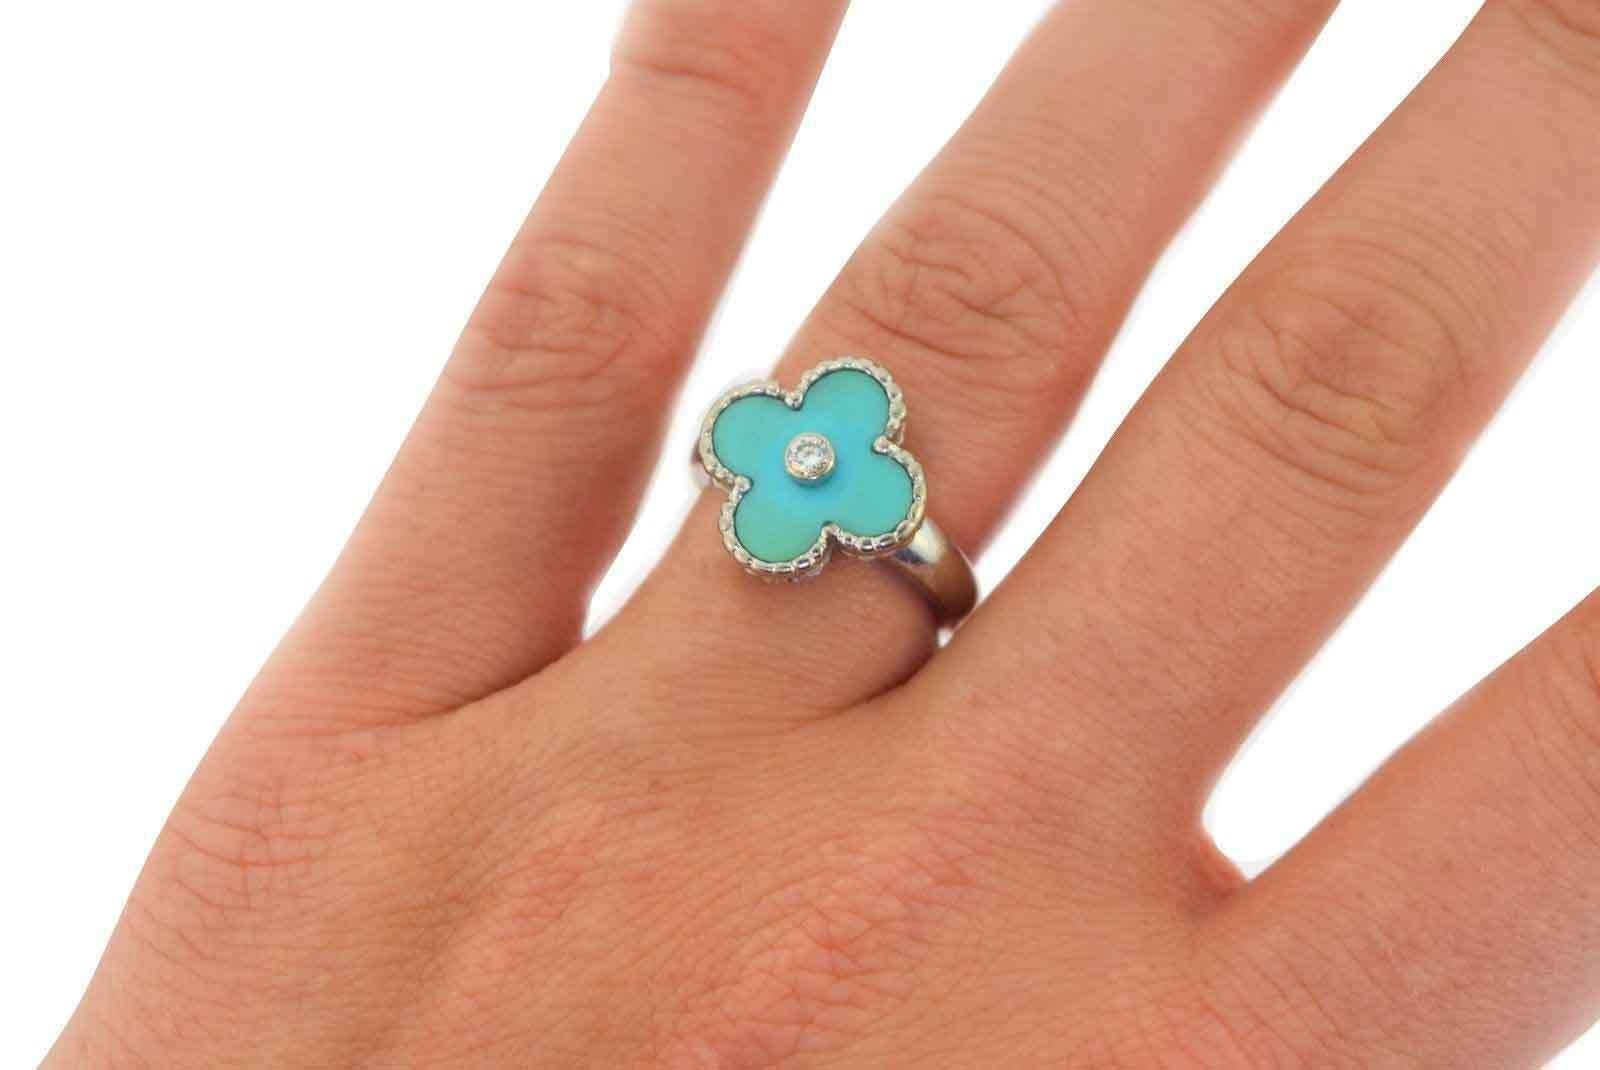 Designer: Van Cleef & Arpels
Collection: Vintage Alhambra
Metal: 18k White Gold
Stone: Turquoise, Diamond
Total Carat Weight: 0.06 ct
Diamond Color / Clarity: F / VVS
Ring Size: 5.25 (US) ; 50 (EURO)
Total Item Weight (grams): 6.5
Motif Dimensions: